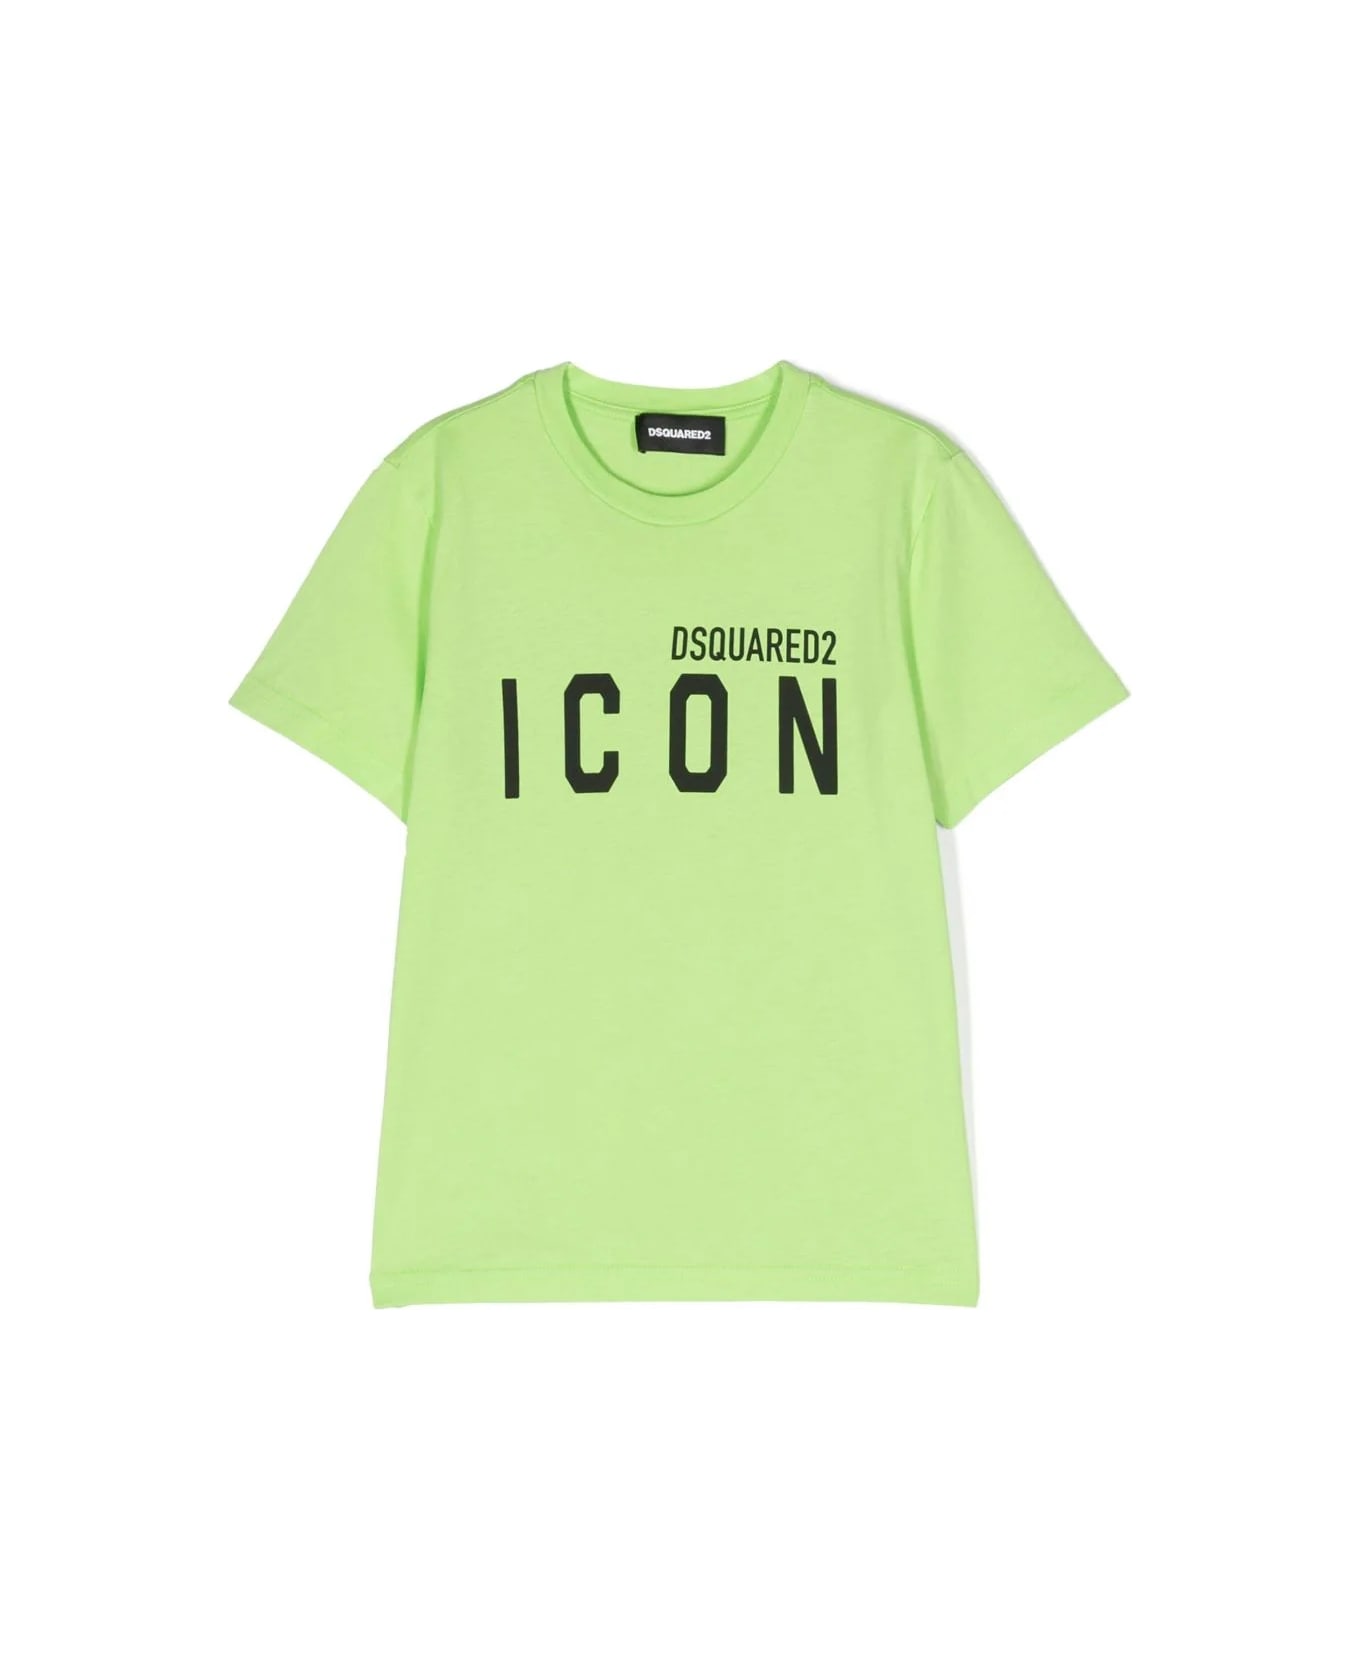 Dsquared2 Printed T-shirt - Green